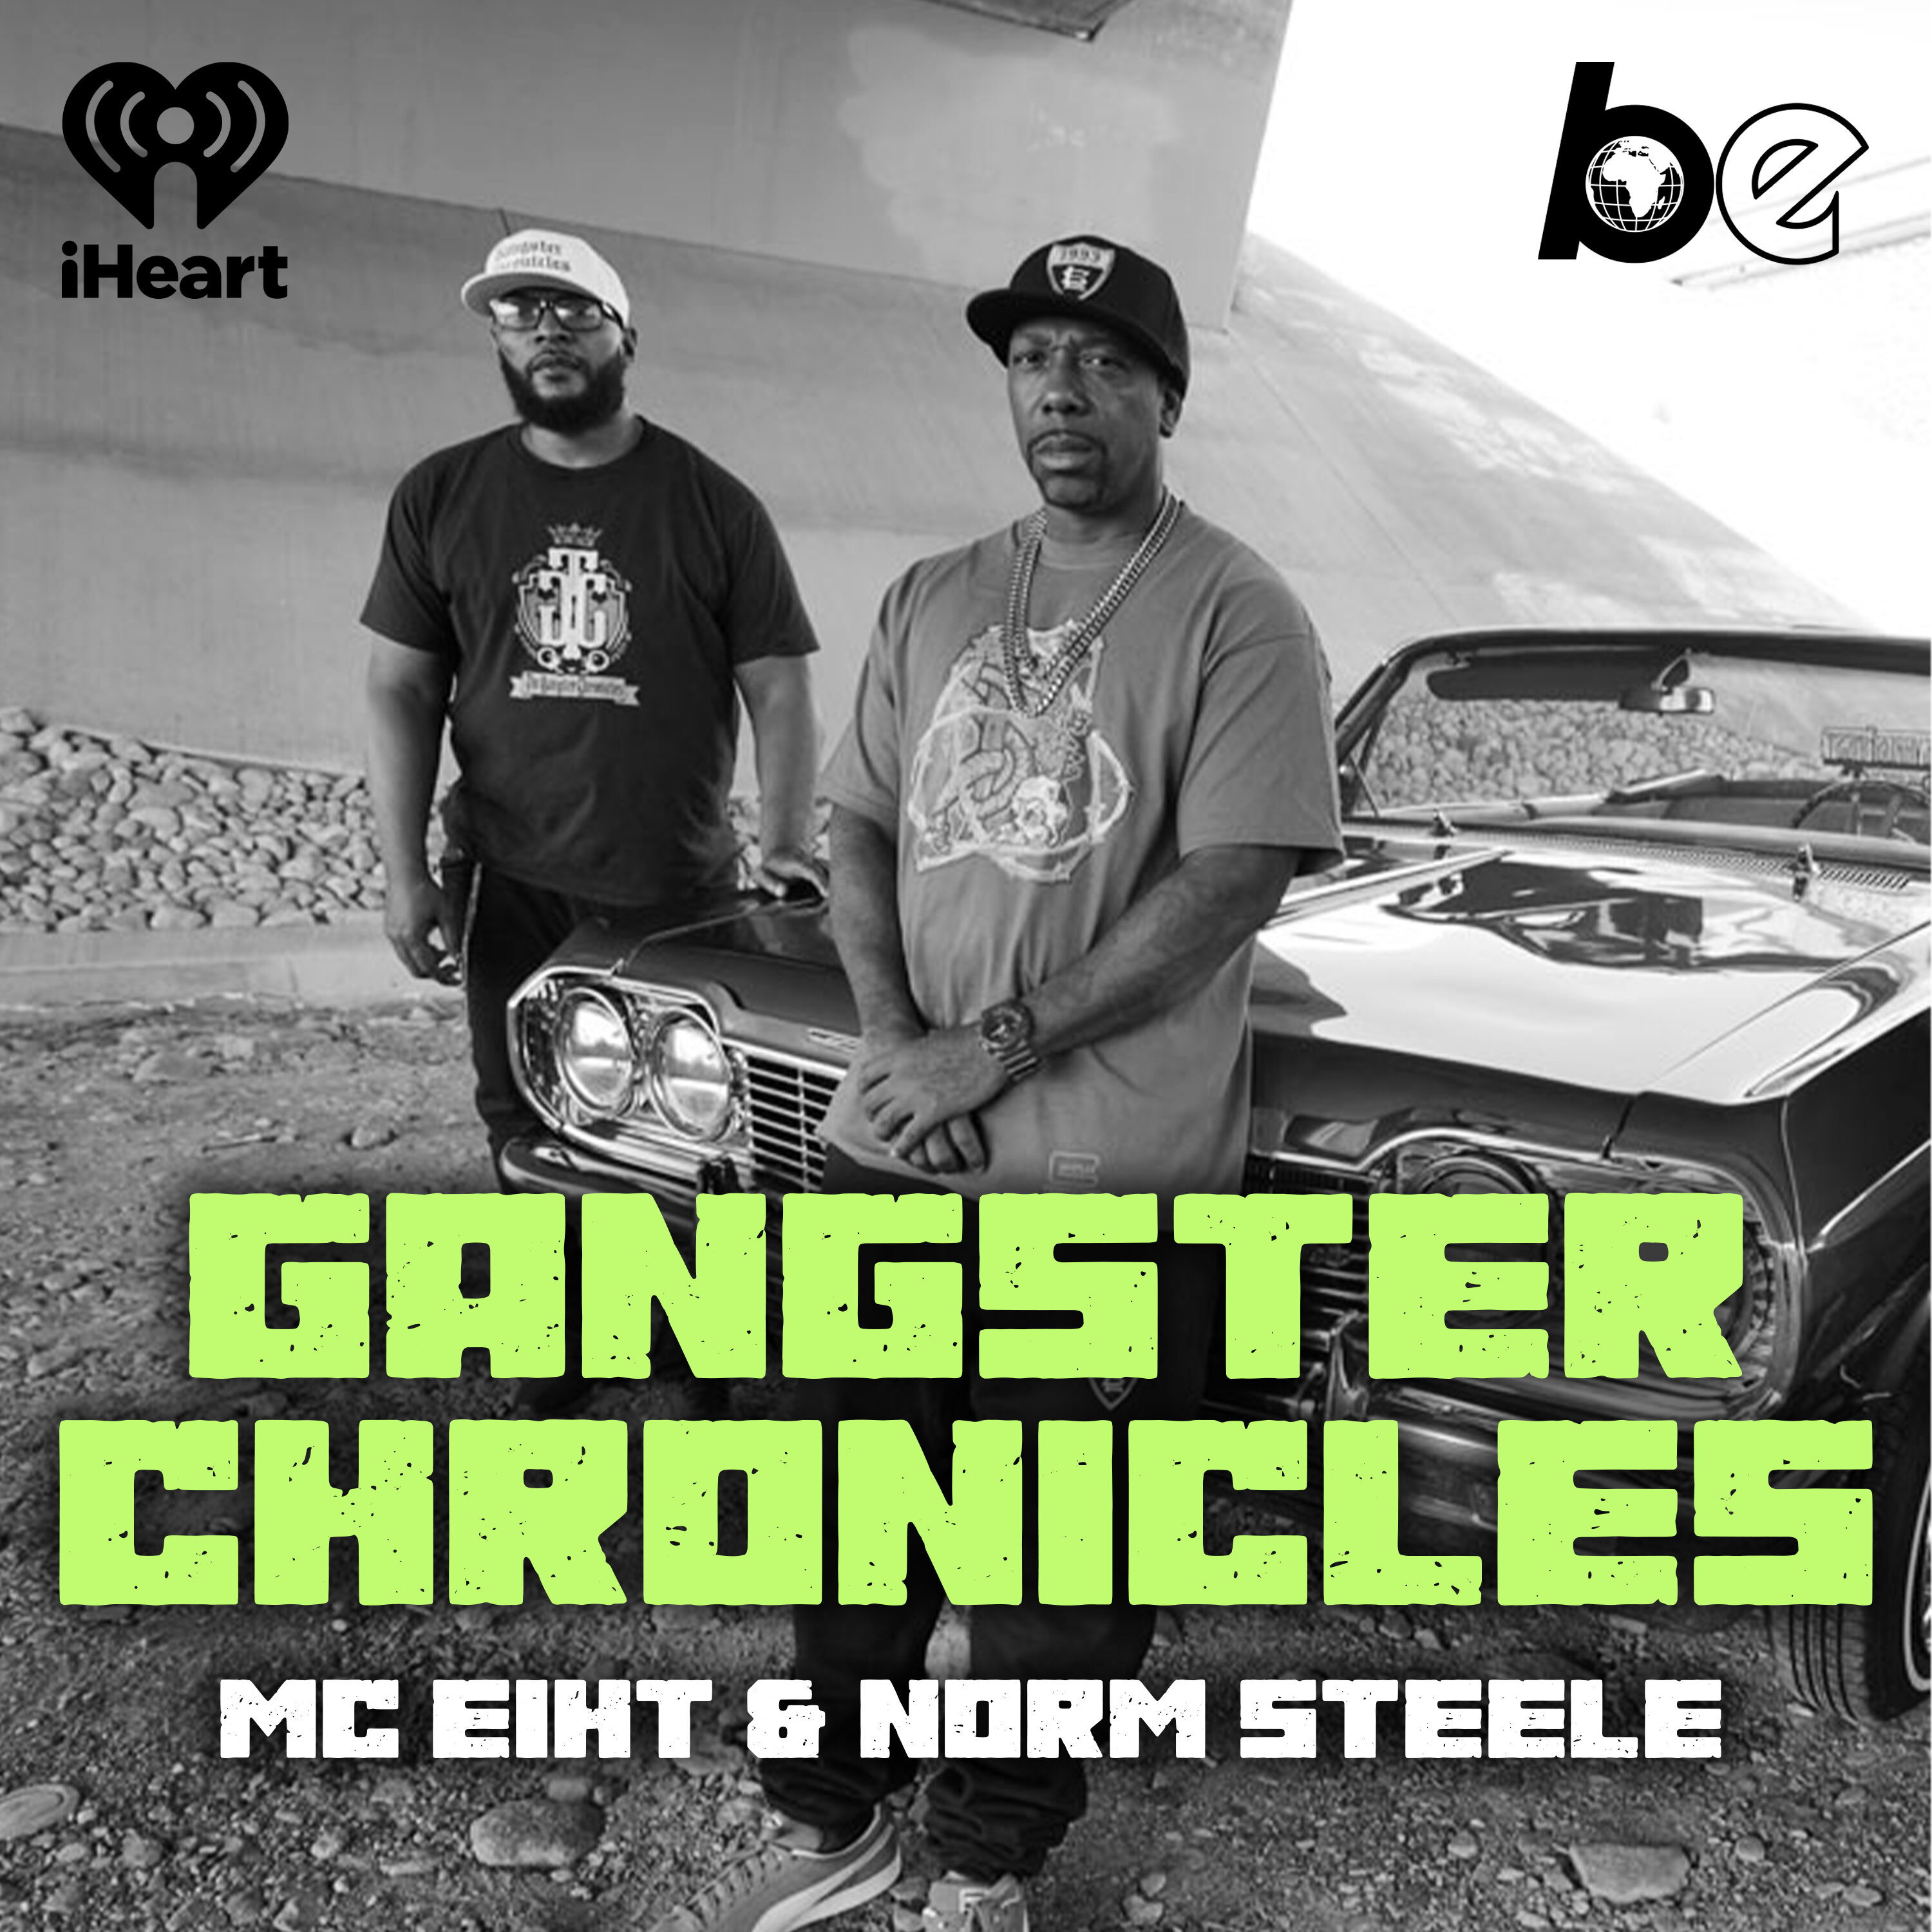 The Gangster Chronicles